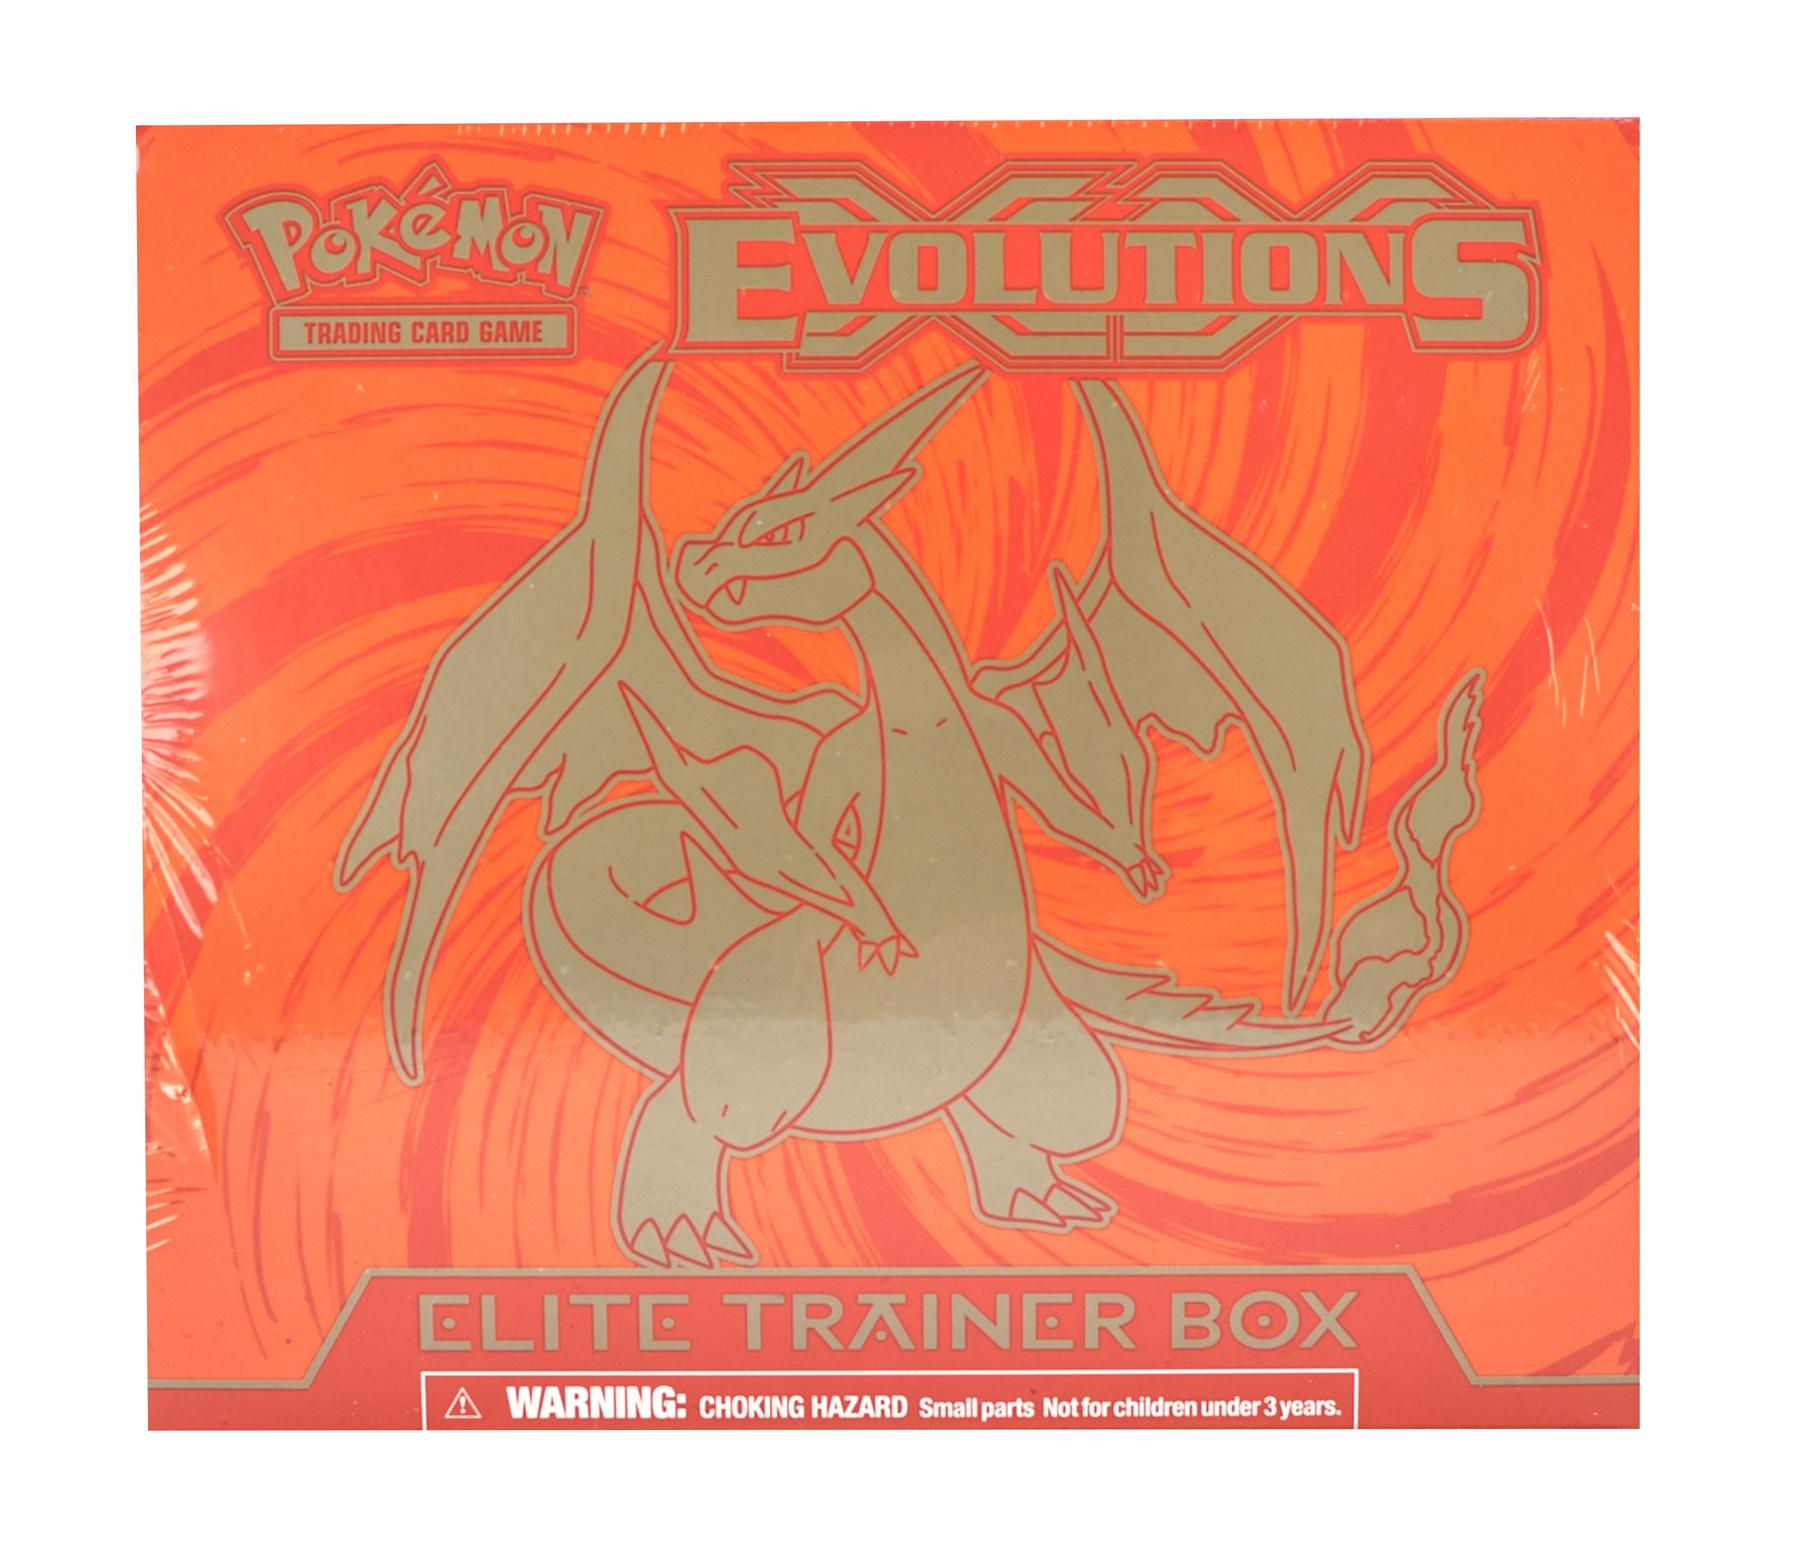 LOT of 4 NEW/SEALED Pokemon XY Evolutions Charizard Elite Trainer Boxes! 